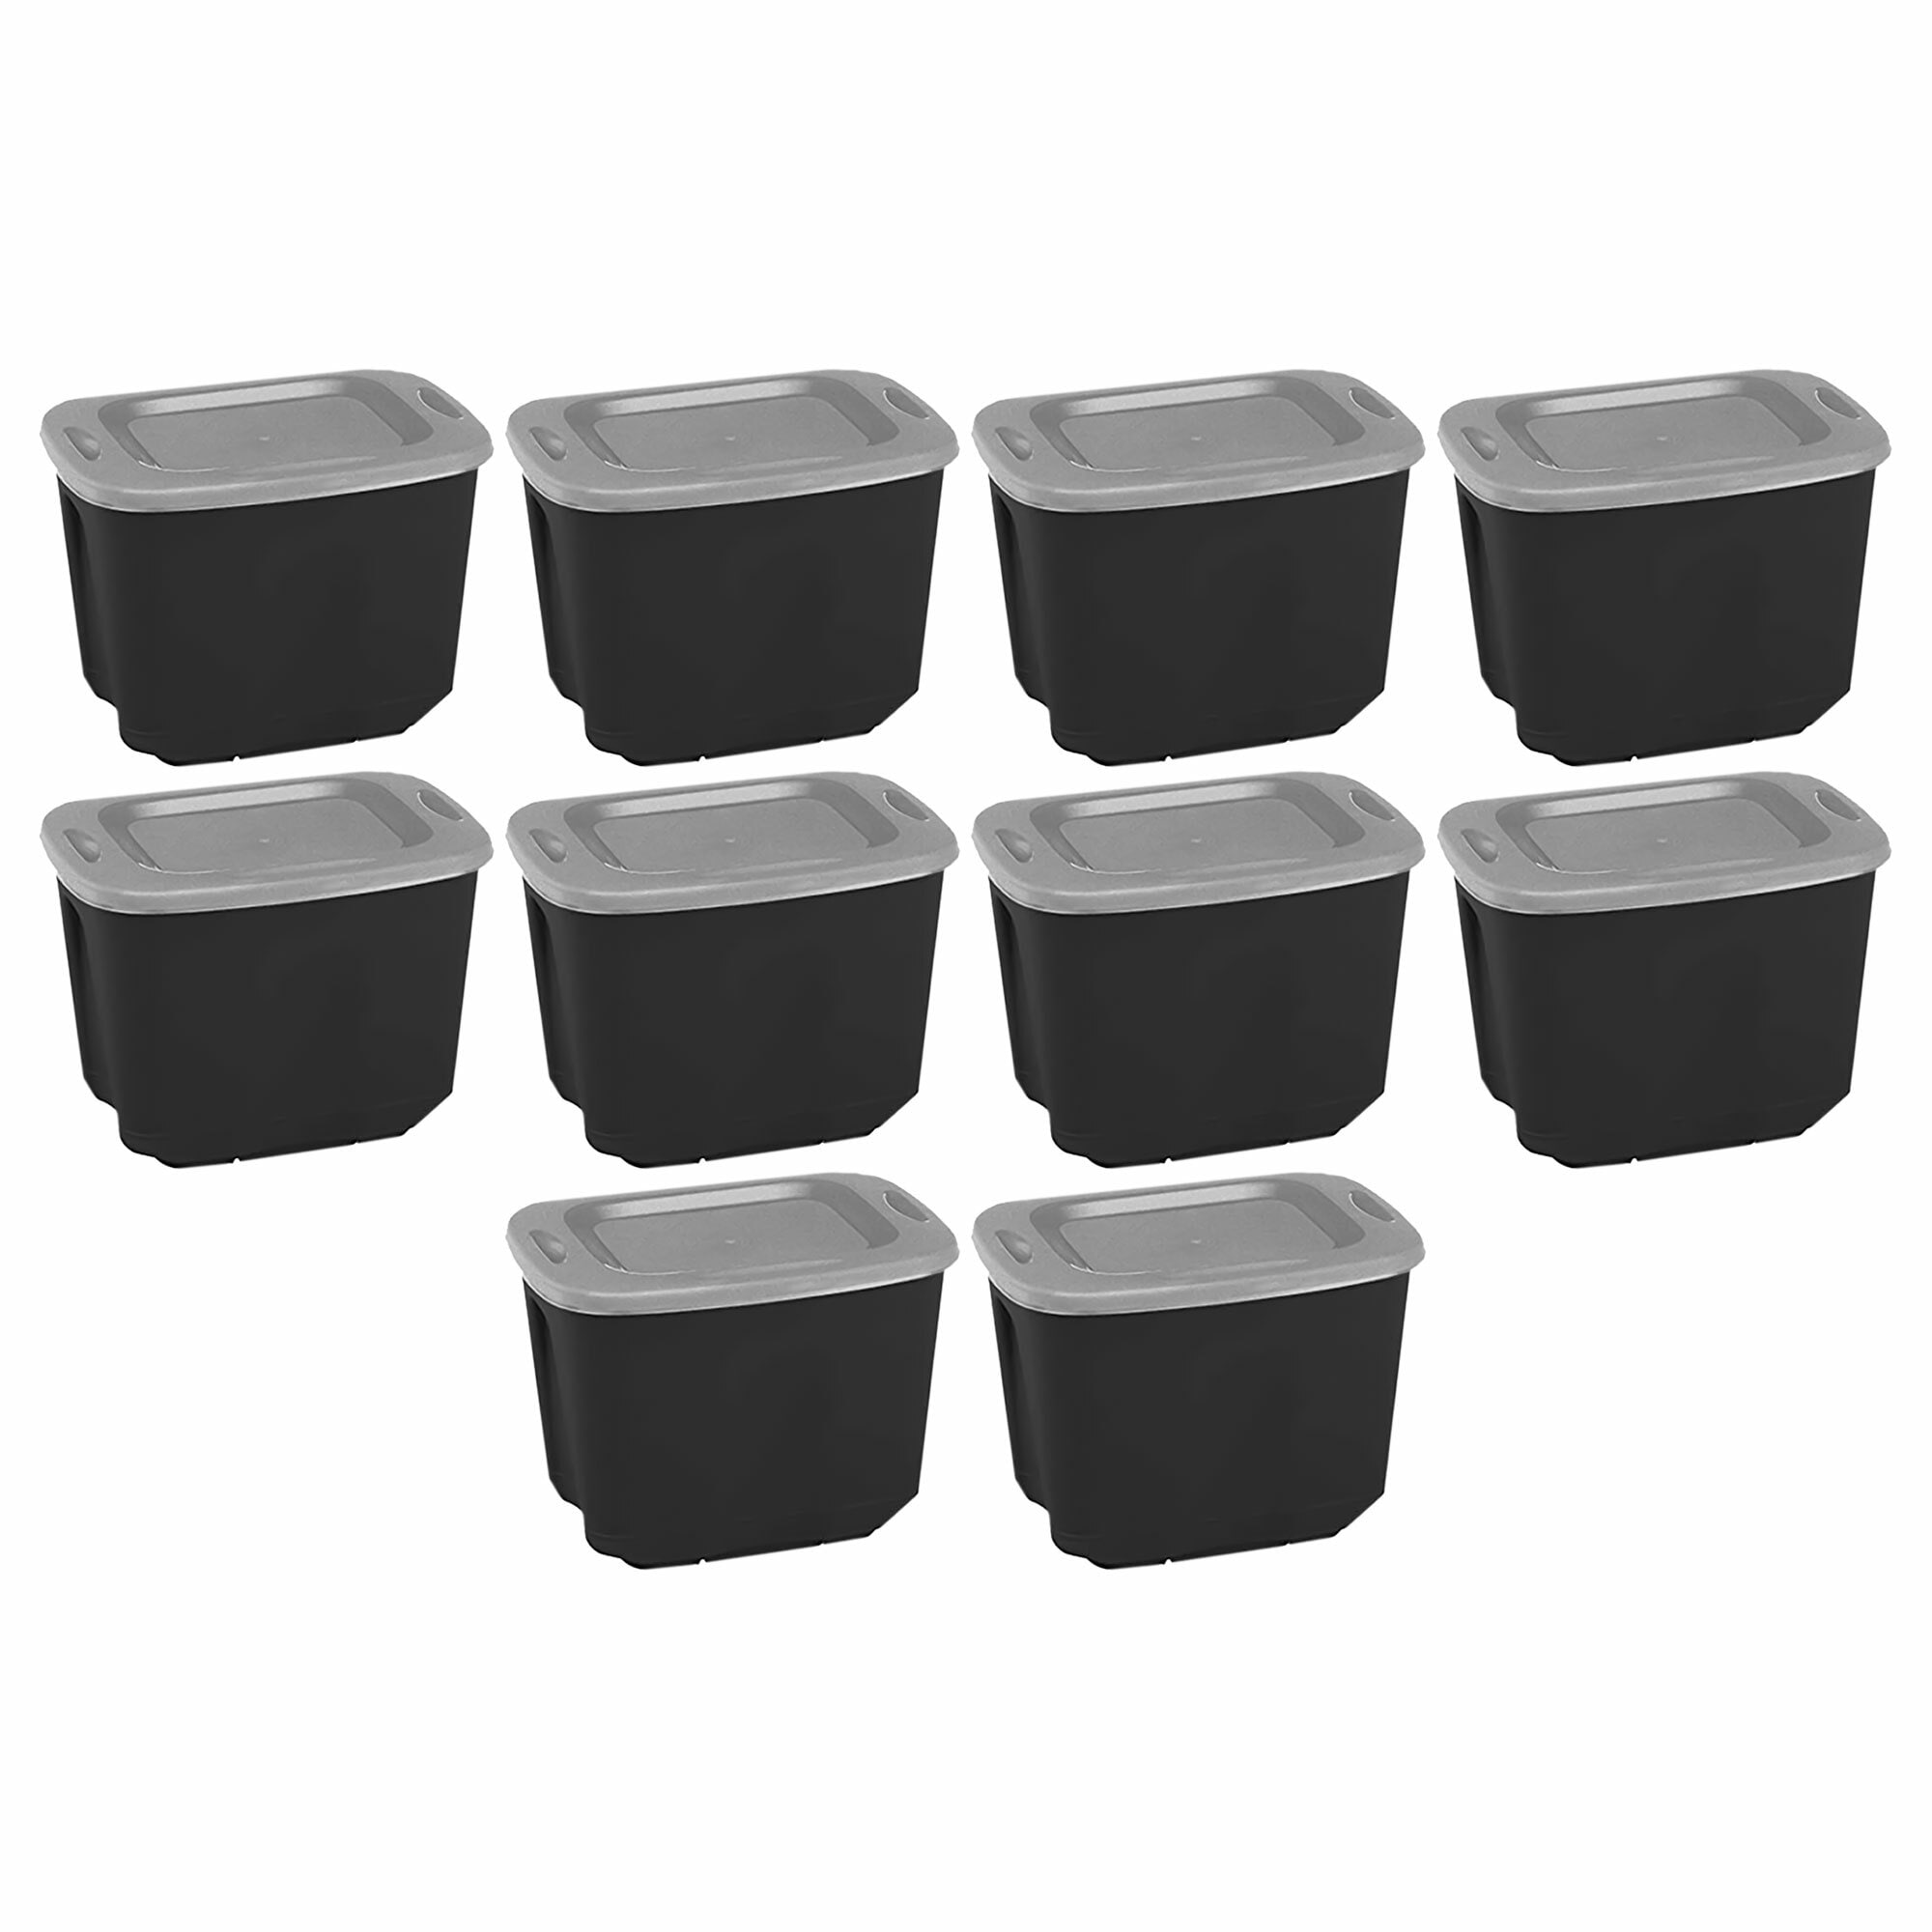 Homz 32 Gallon Large Standard Stackable Plastic Storage Container